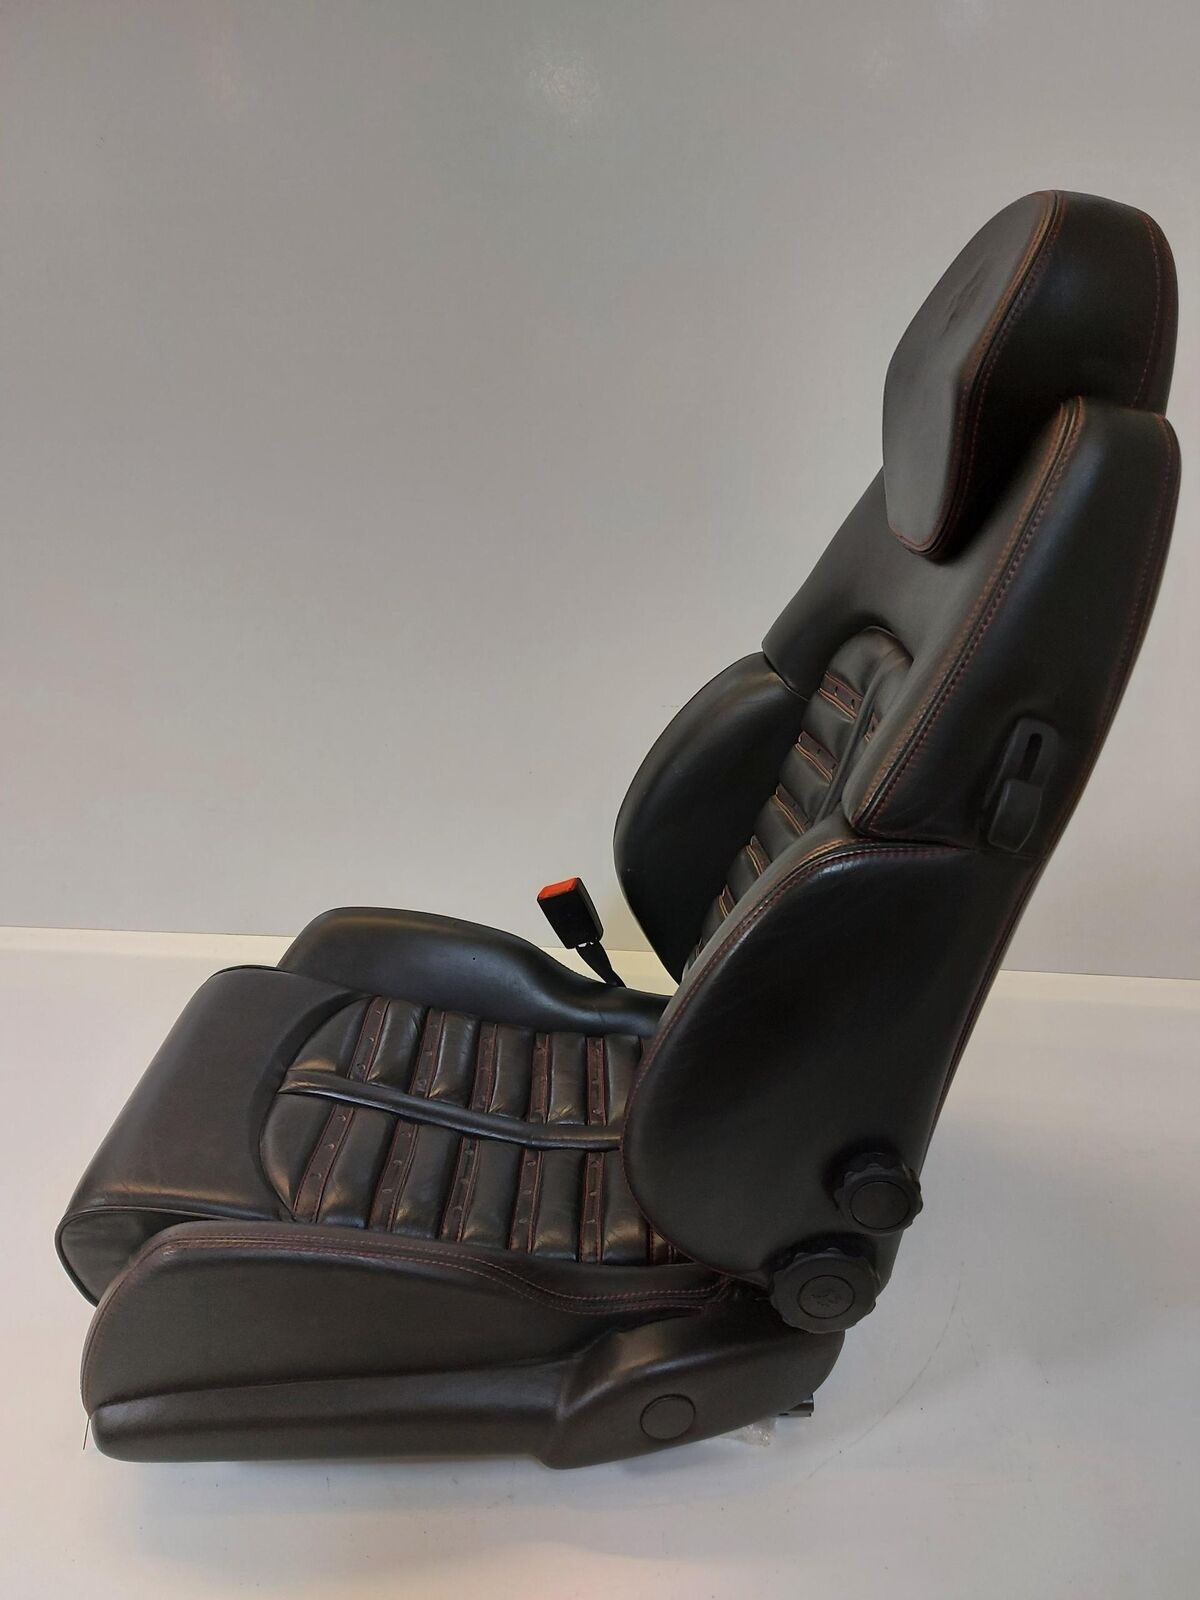 2000 Ferrari 360 Modena Front Seat Left Driver LH Black With Red Stitching